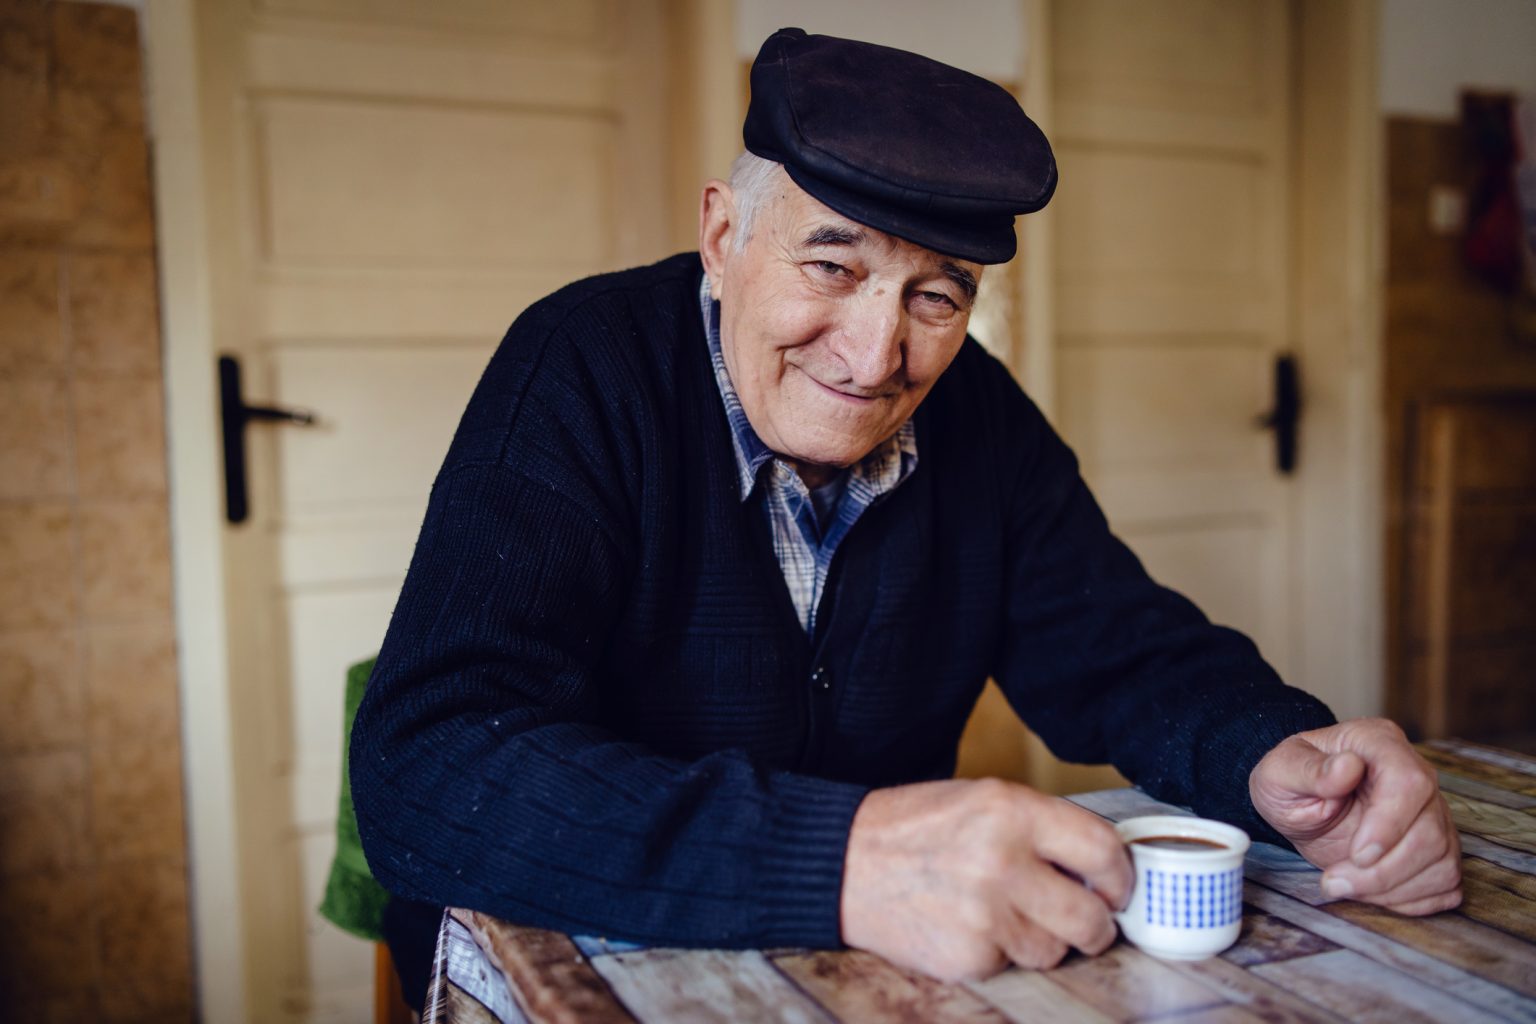 Senior man grandfather old pensioner farmer wearing black sweater and hat having a cup of coffee or tea by the table at home sitting alone smiling